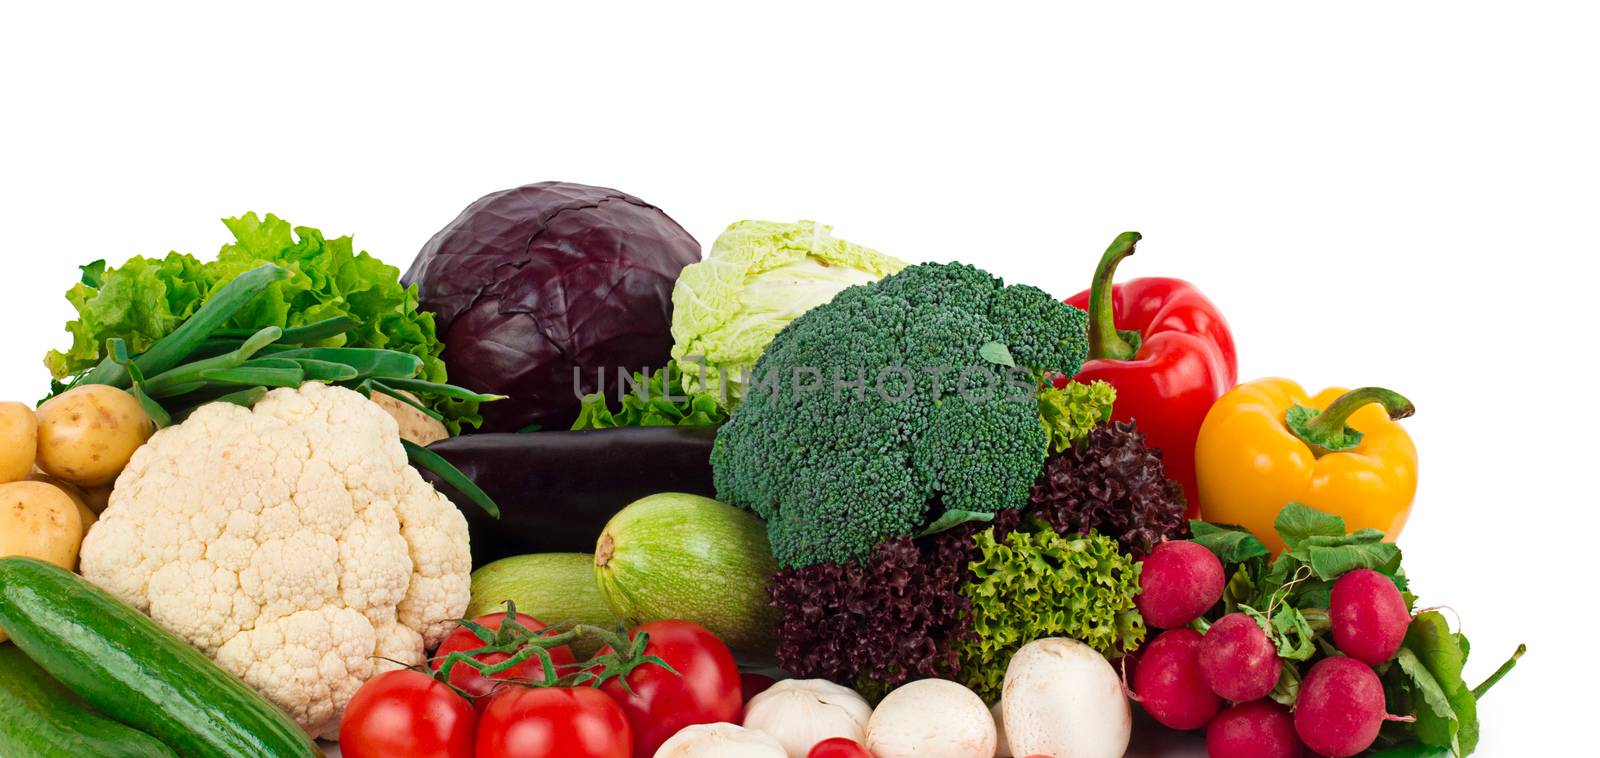 fresh vegetables on the white background by ozaiachin